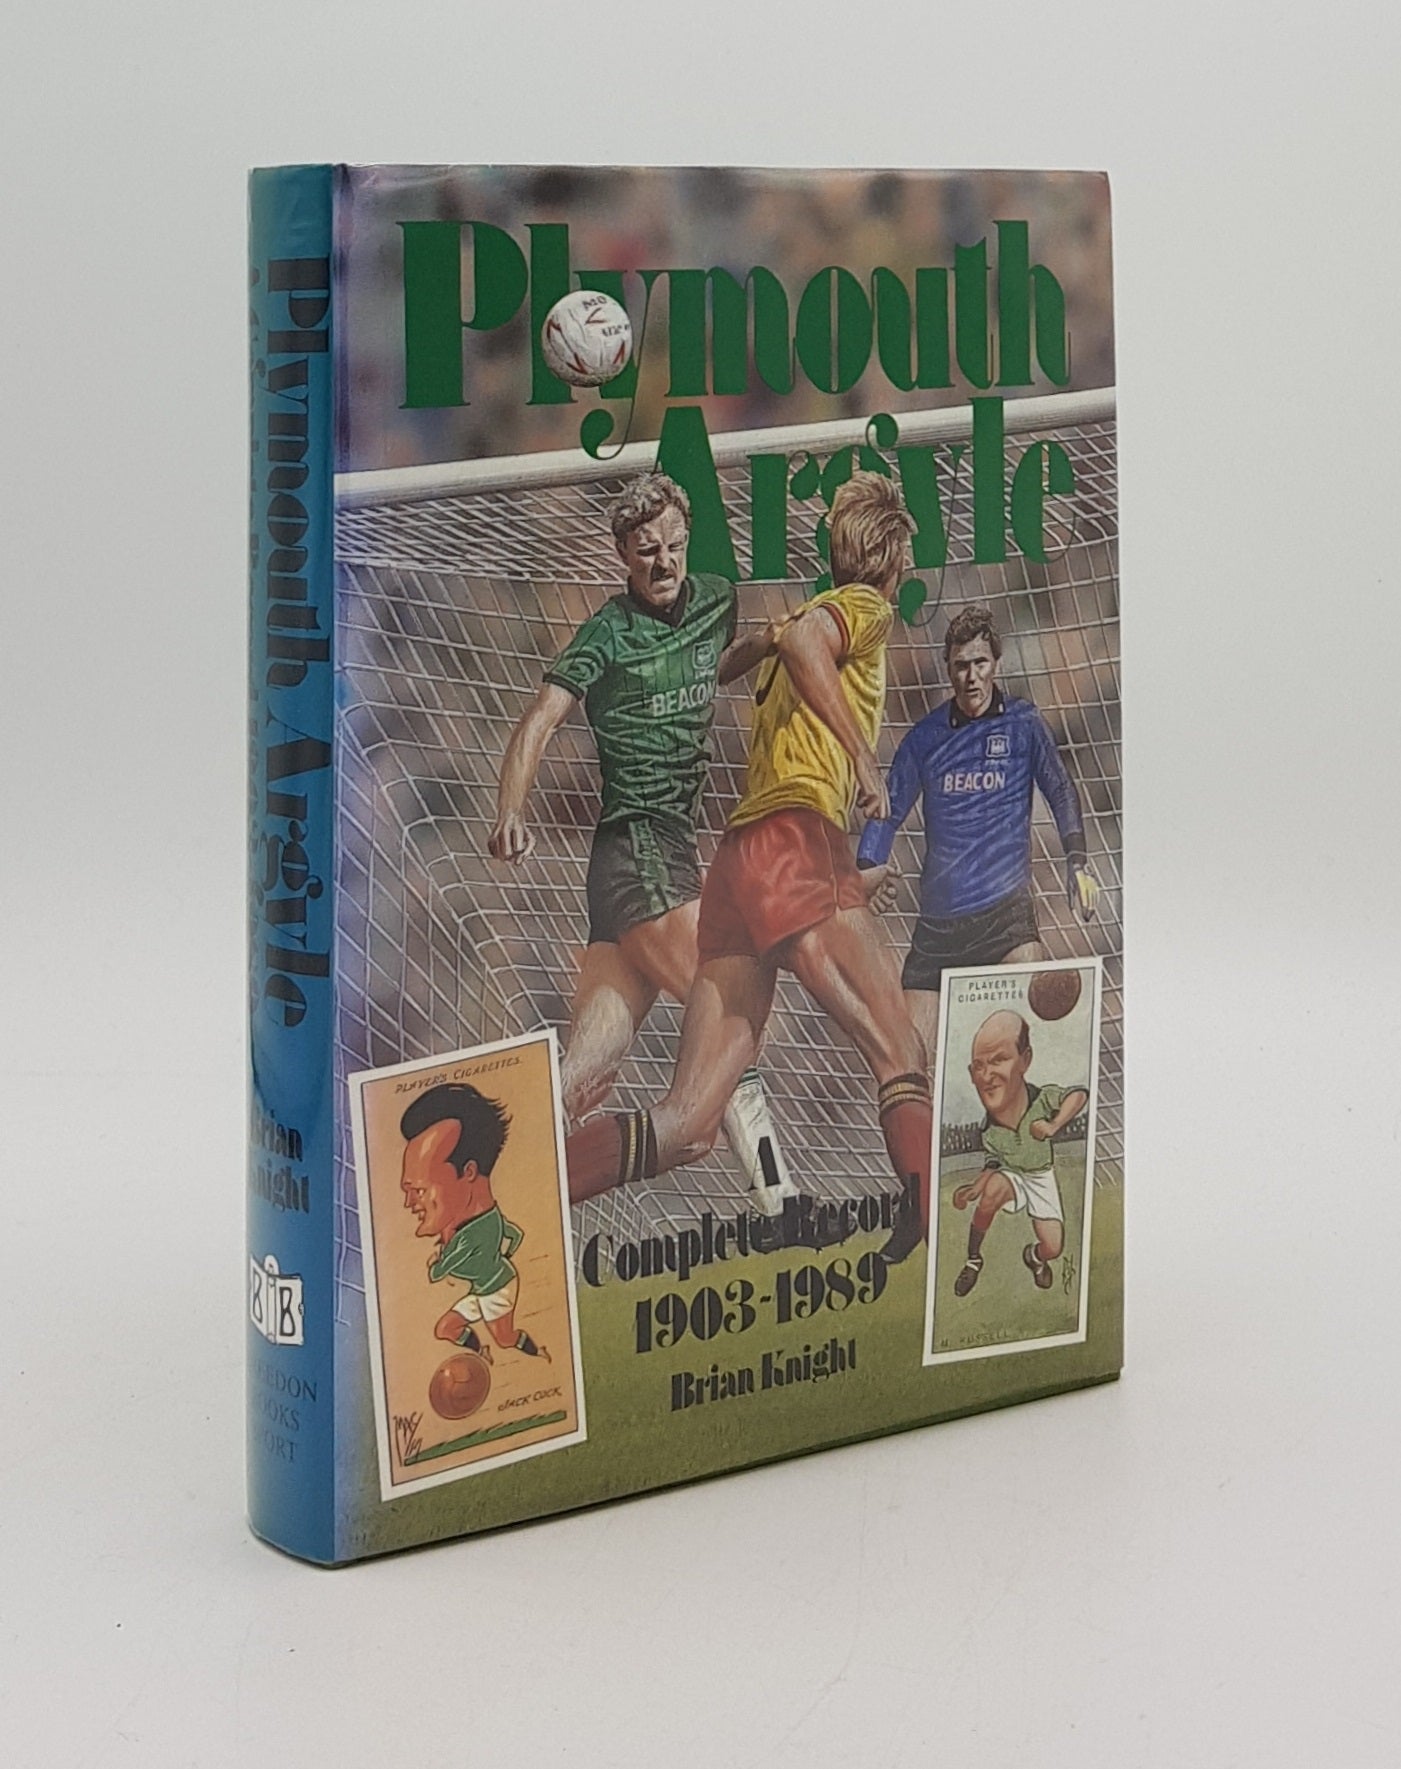 KNIGHT Brian - Plymouth Argyle a Complete Record 1903-1989